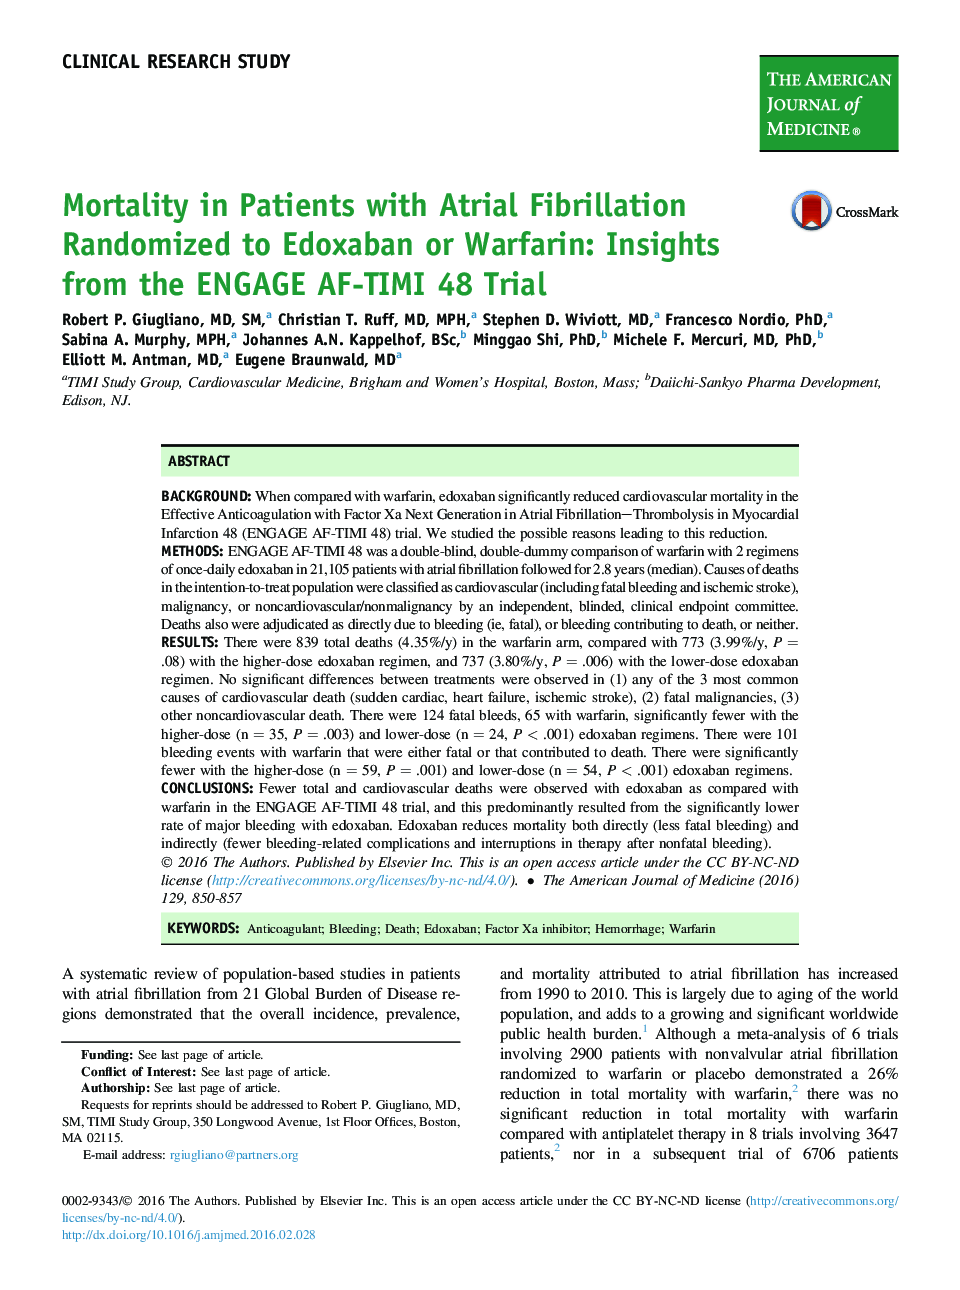 Clinical research studyMortality in Patients with Atrial Fibrillation Randomized to Edoxaban or Warfarin: Insights from the ENGAGE AF-TIMI 48 Trial